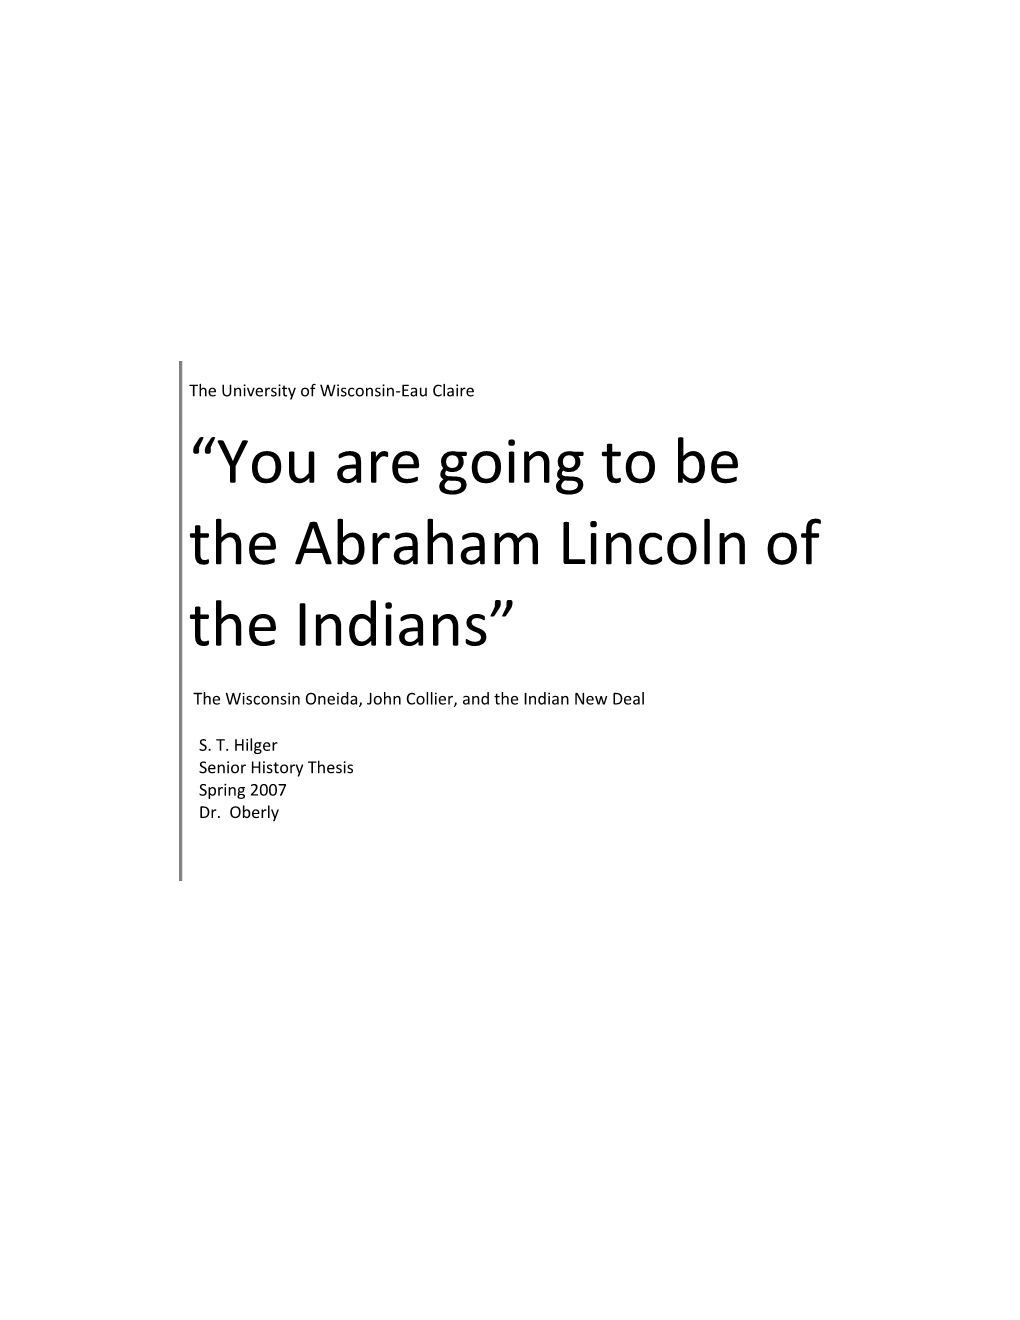 You Are Going to Be the Abraham Lincoln of the Indians